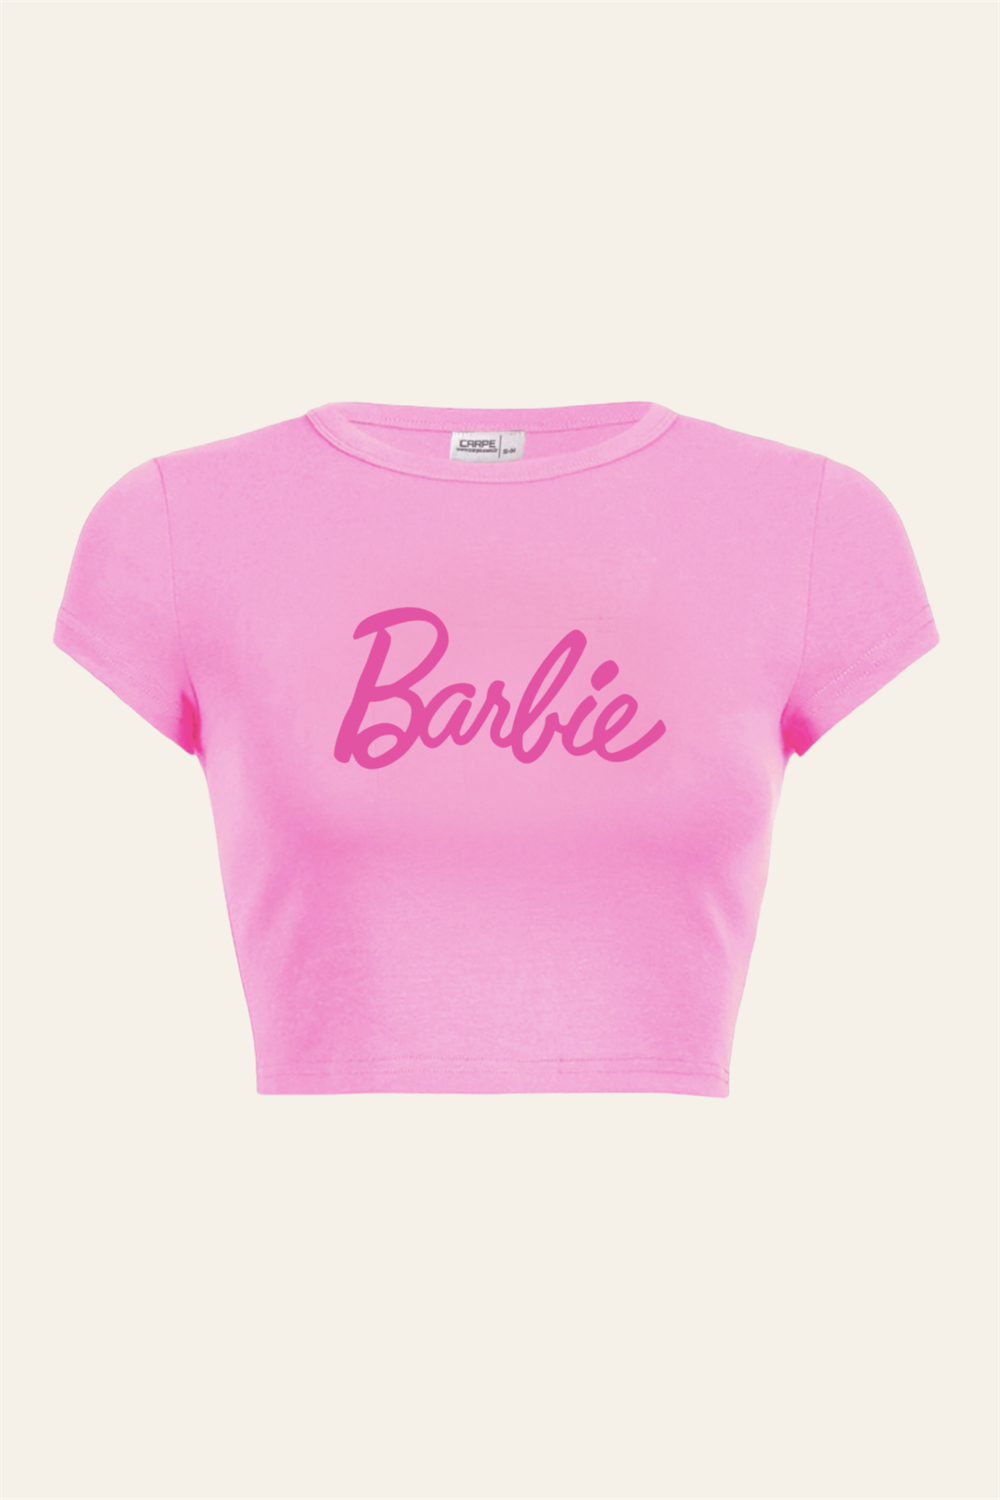 Barbie Pink Crop Review Your Product Now